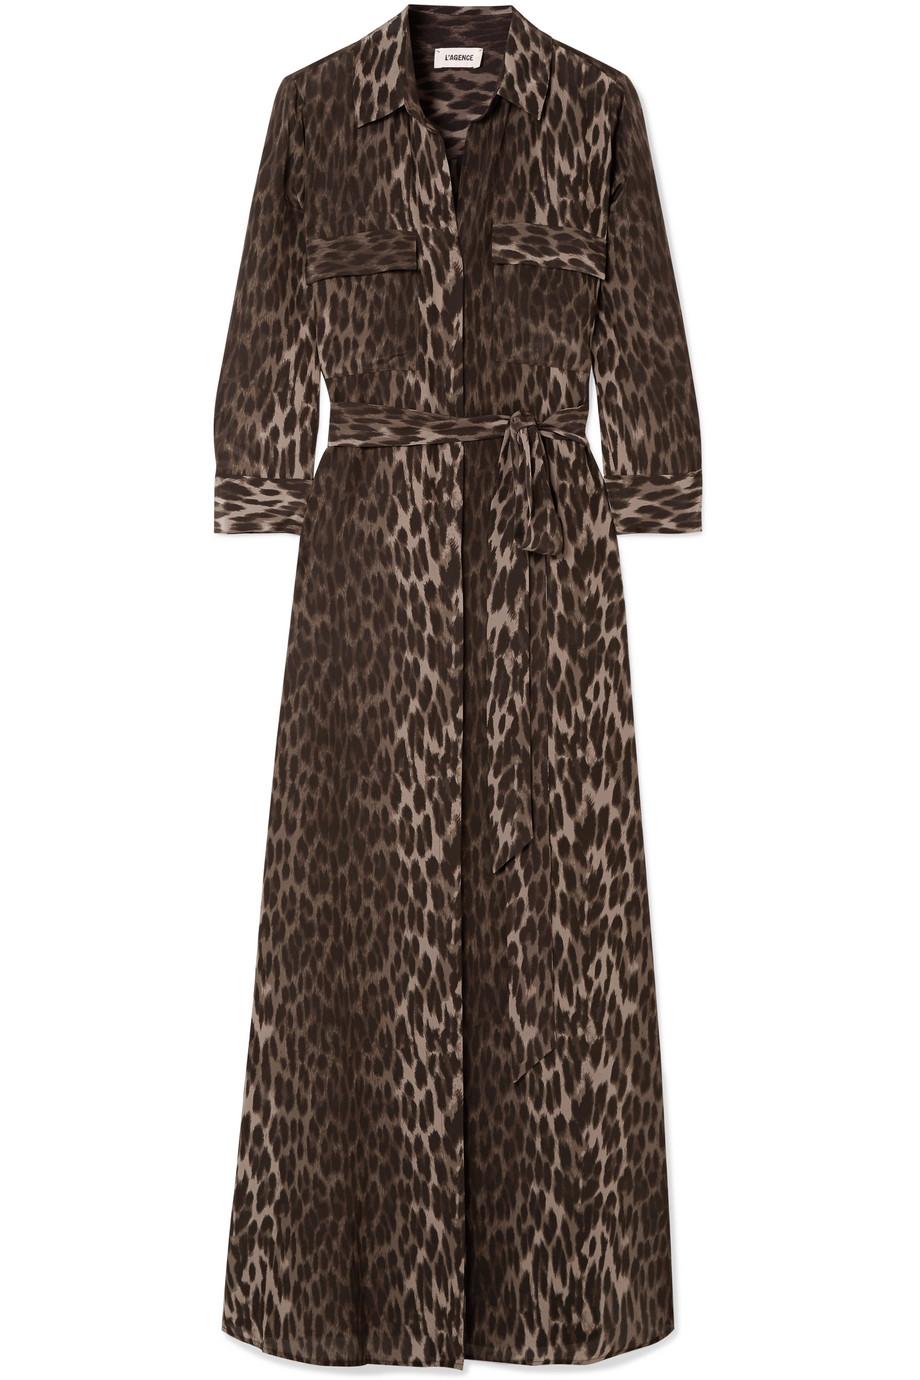 This John Lewis Leopard-Print Dress Has Been a Hit | Who What Wear